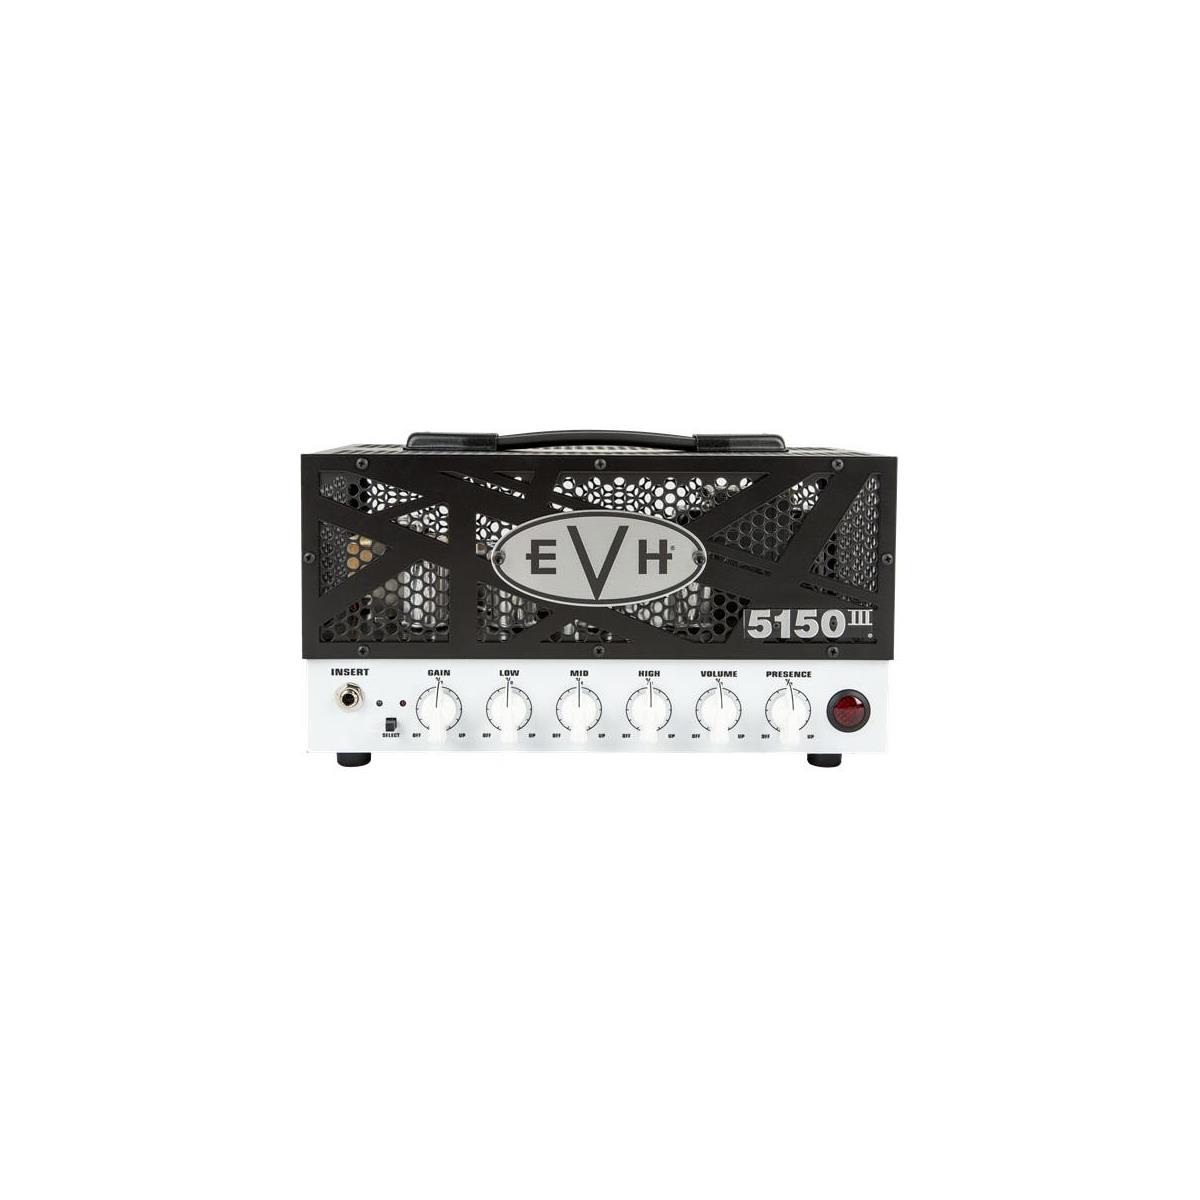 EVH 5150 III - 15 Watt, Lunchbox LBX Tube Head, 120V A mighty sonic force to be reckoned with, the EVH 5150III 15W LBX is an easy-to-carry "lunchbox" guitar amp head-but don't let it's diminutive size fool you; its packed to the gills with searing tone! Armed with five ECC83S (12Ax7) and two EL84 tubes for incredible high gain sound, it performs like an arena-filling champ. Two flexible channels, the famous EVH Blue "Crunch" and Red "Full Burn," combine with the familiar low/mid/high/presence tone controls and 1/4-power switch so you can easily dial-in your own roaring Variac-less "brown" sound.  Dial up a tasty crunch for rhythm work and then when it's time for a face-melting solo, stomp on the included footswitch to call up an intense lead tone with tons of singing sustain. For colossal tone and serious crunch in a compact package, look no further than the EVH 5150III 15W LBX!